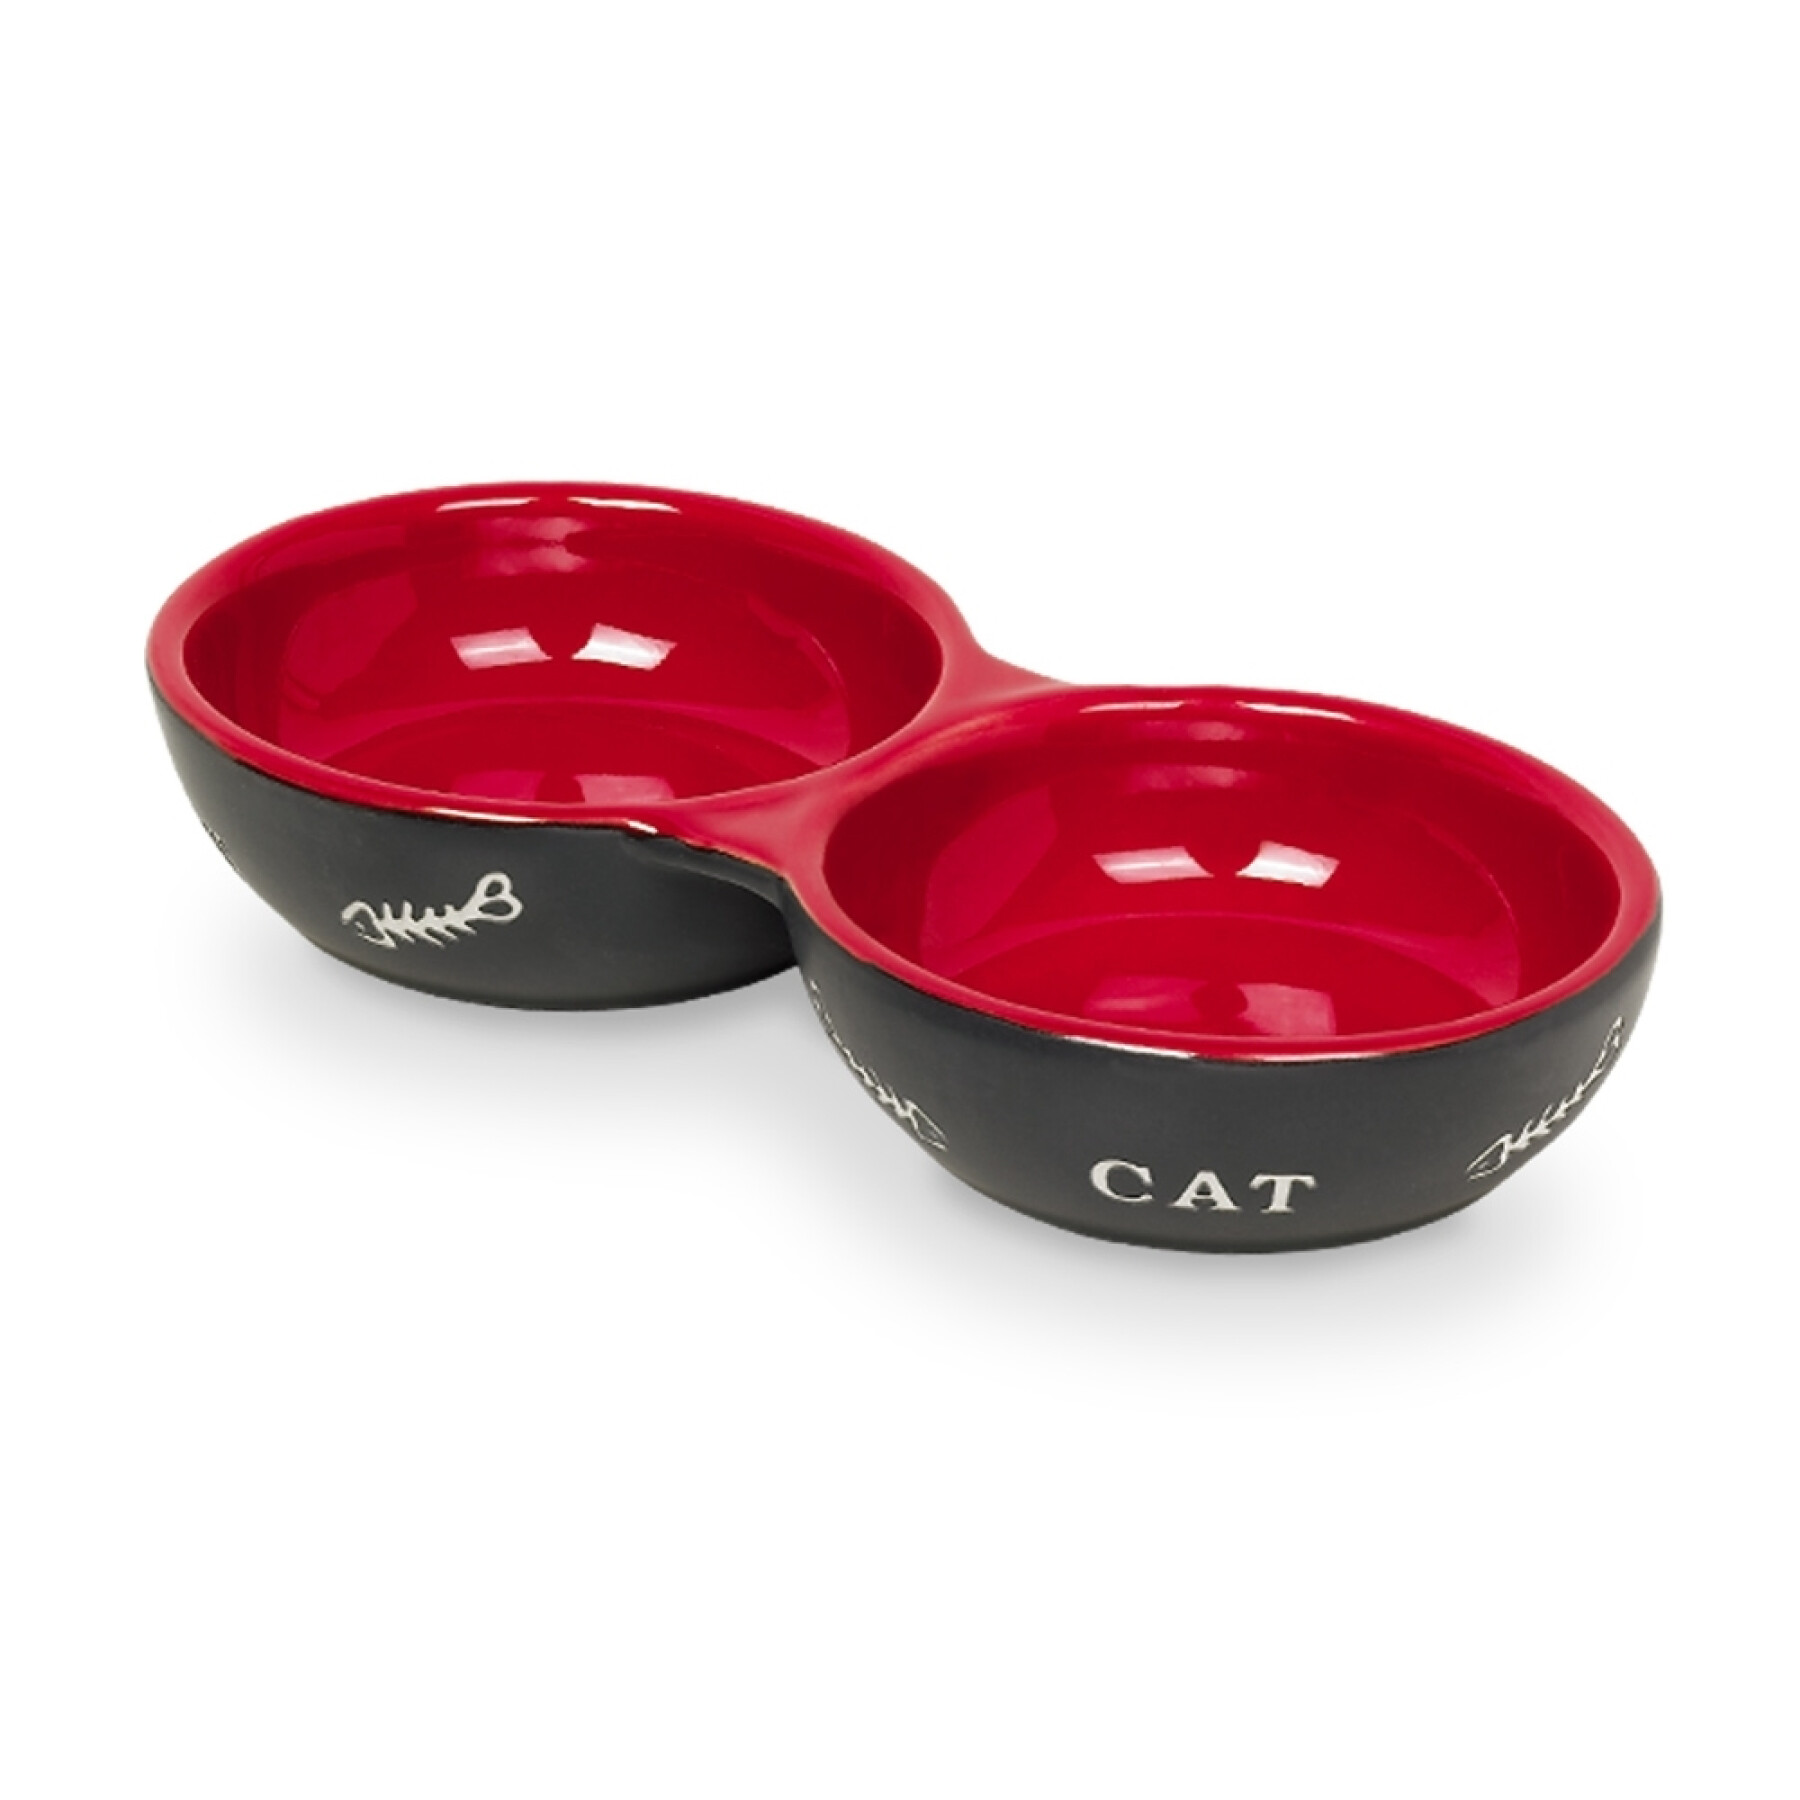 Ceramic double bowl for cats Nobby Pet Cat